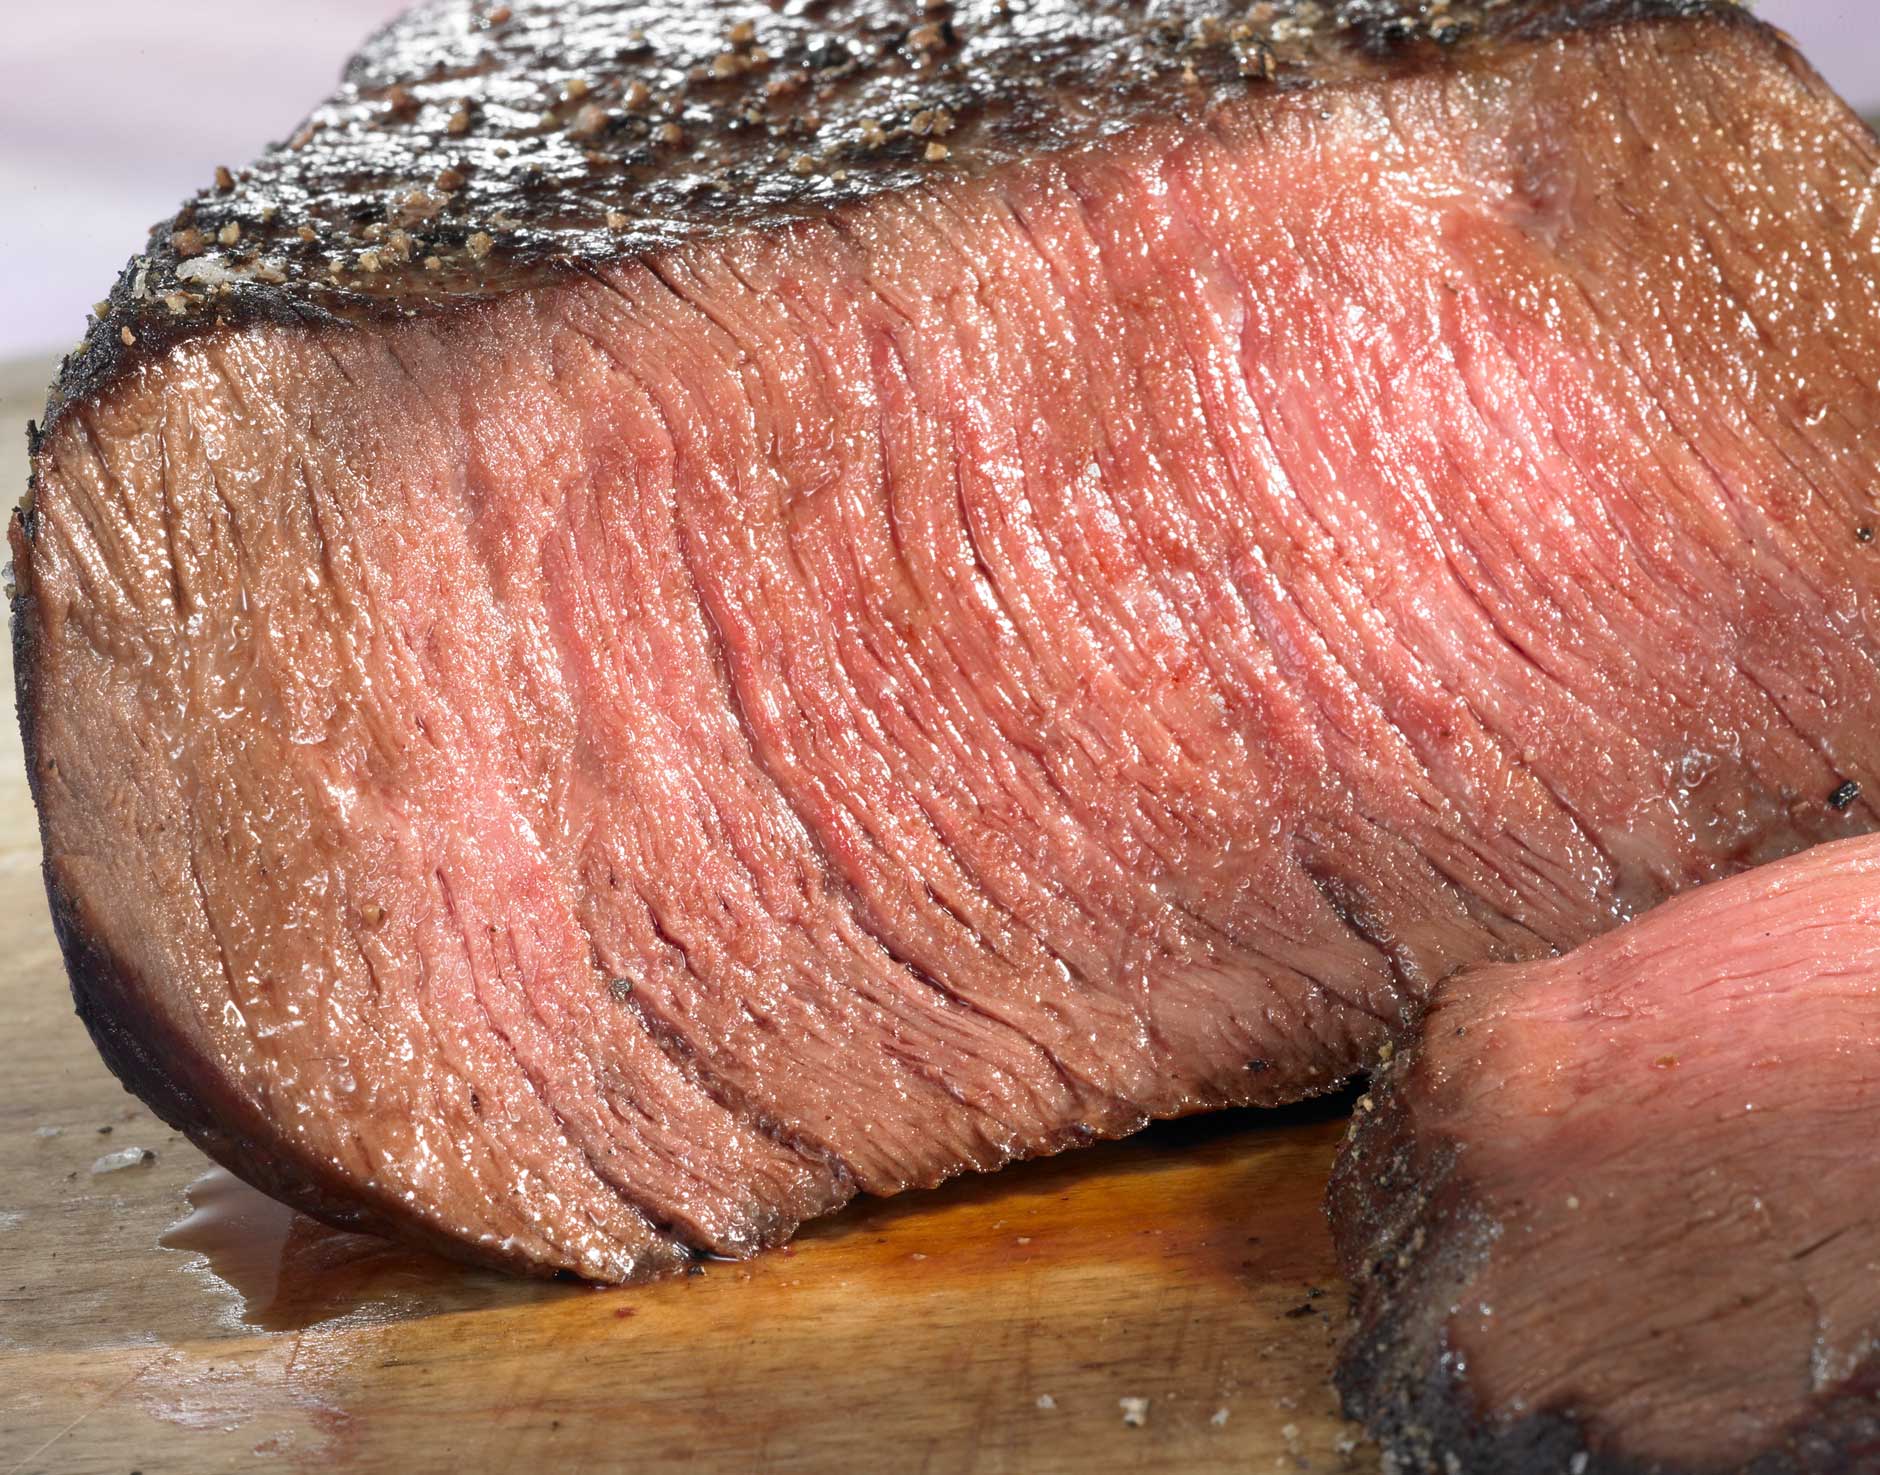 Glasshouse Assignment - David Bishop - Food Photography - London Broil Steak